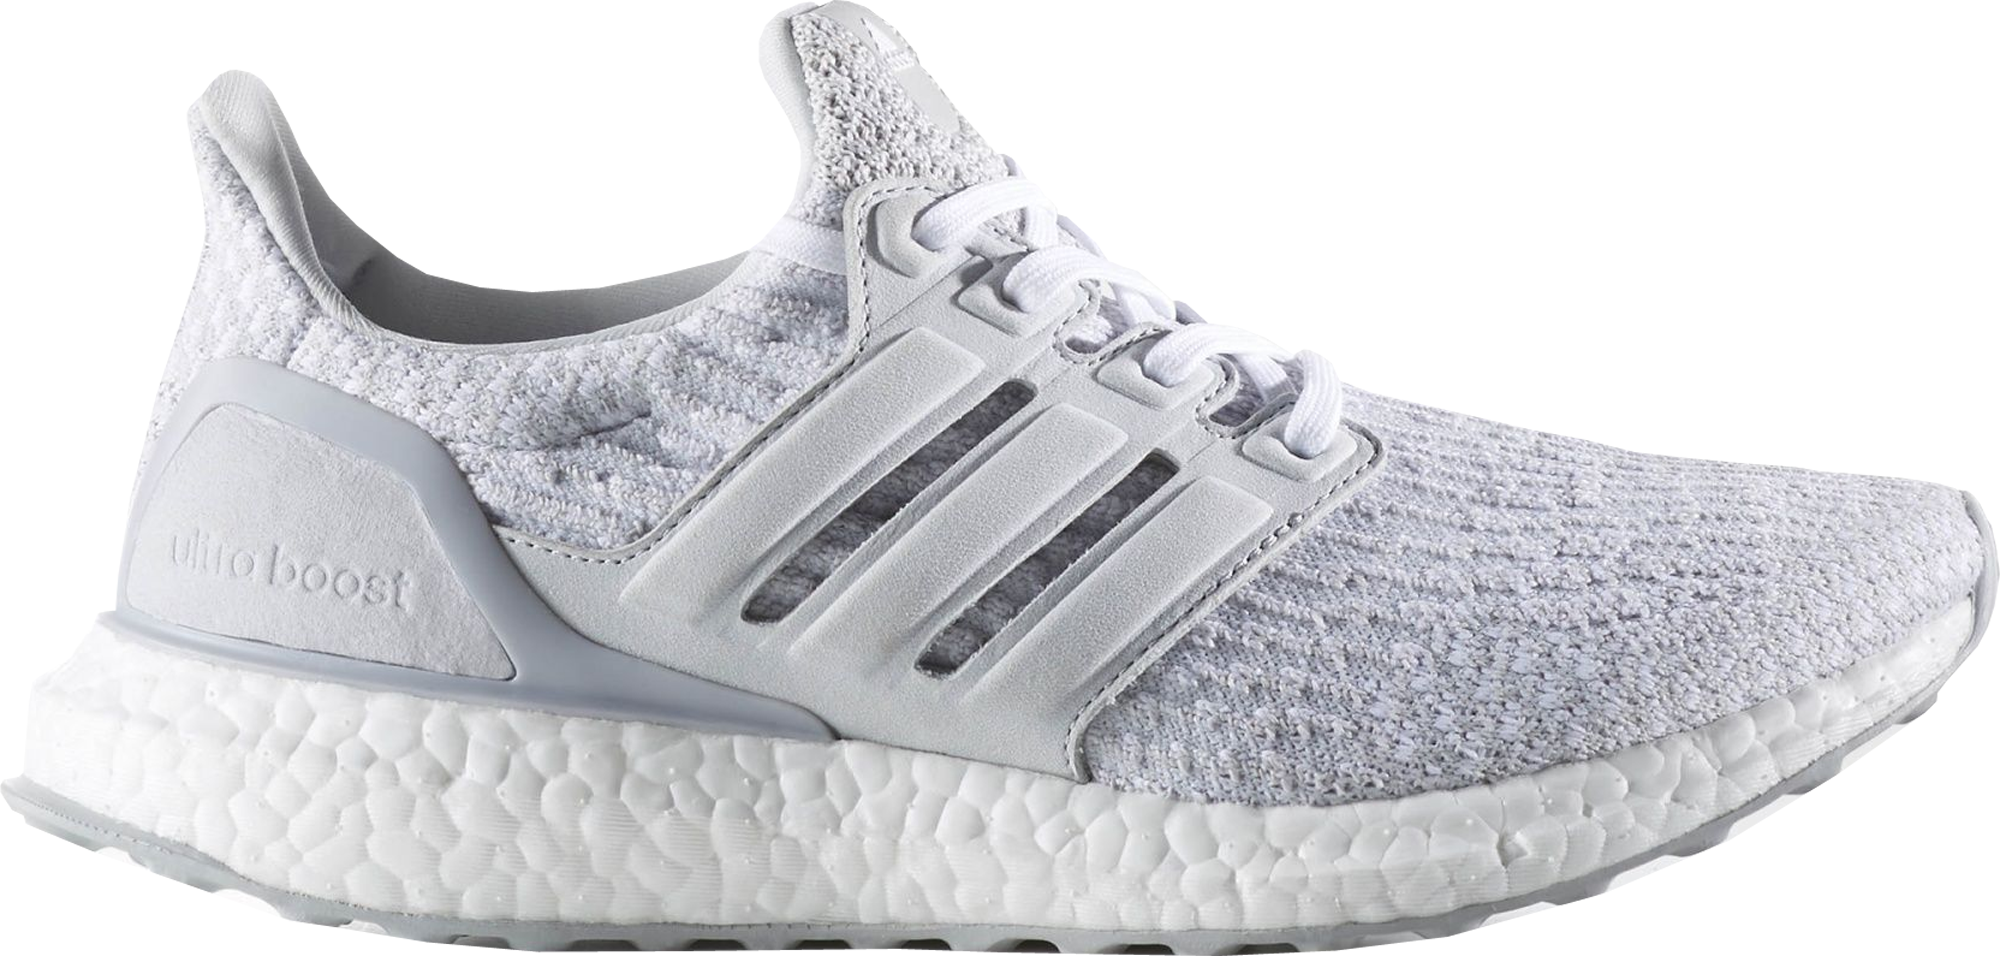 pure boost reigning champ grey